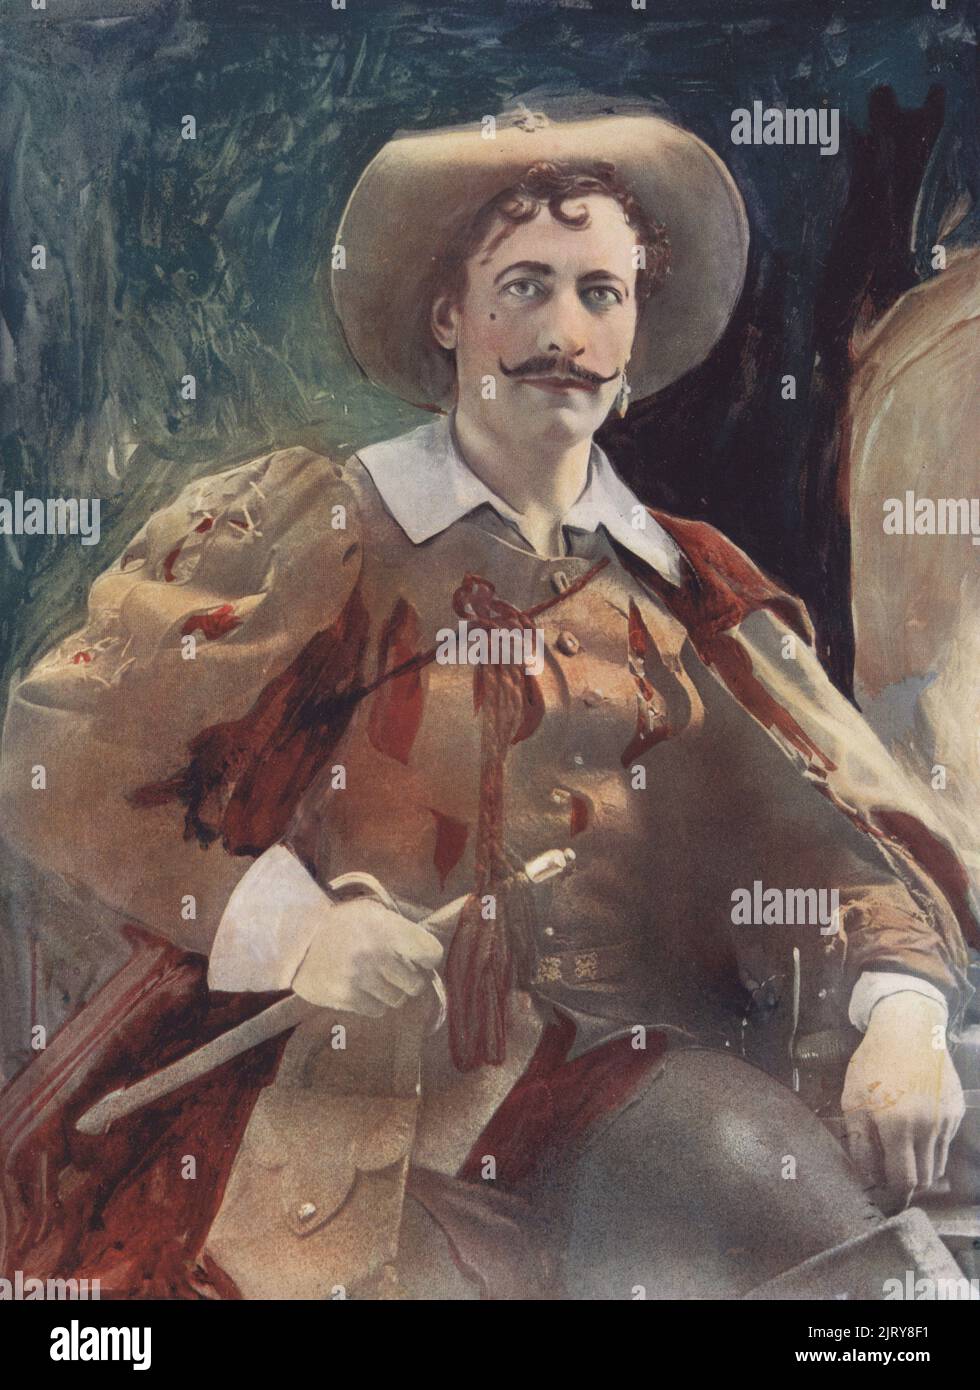 Lewis Waller as the Duke of Buckingham in The Three Musketeers, in a production by Herbert Beerbohm Tree, Her Majesty's Theatre, 1899. William Waller Lewis, English actor and theatre manager, 1860-1915. Photograph by Alfred Ellis and Walery (Stanislaw Julian Ignacy). Colour printing of a hand-coloured illustration based on a monochrome photograph from George Newnes’s Players of the Day, London, 1905. Stock Photo